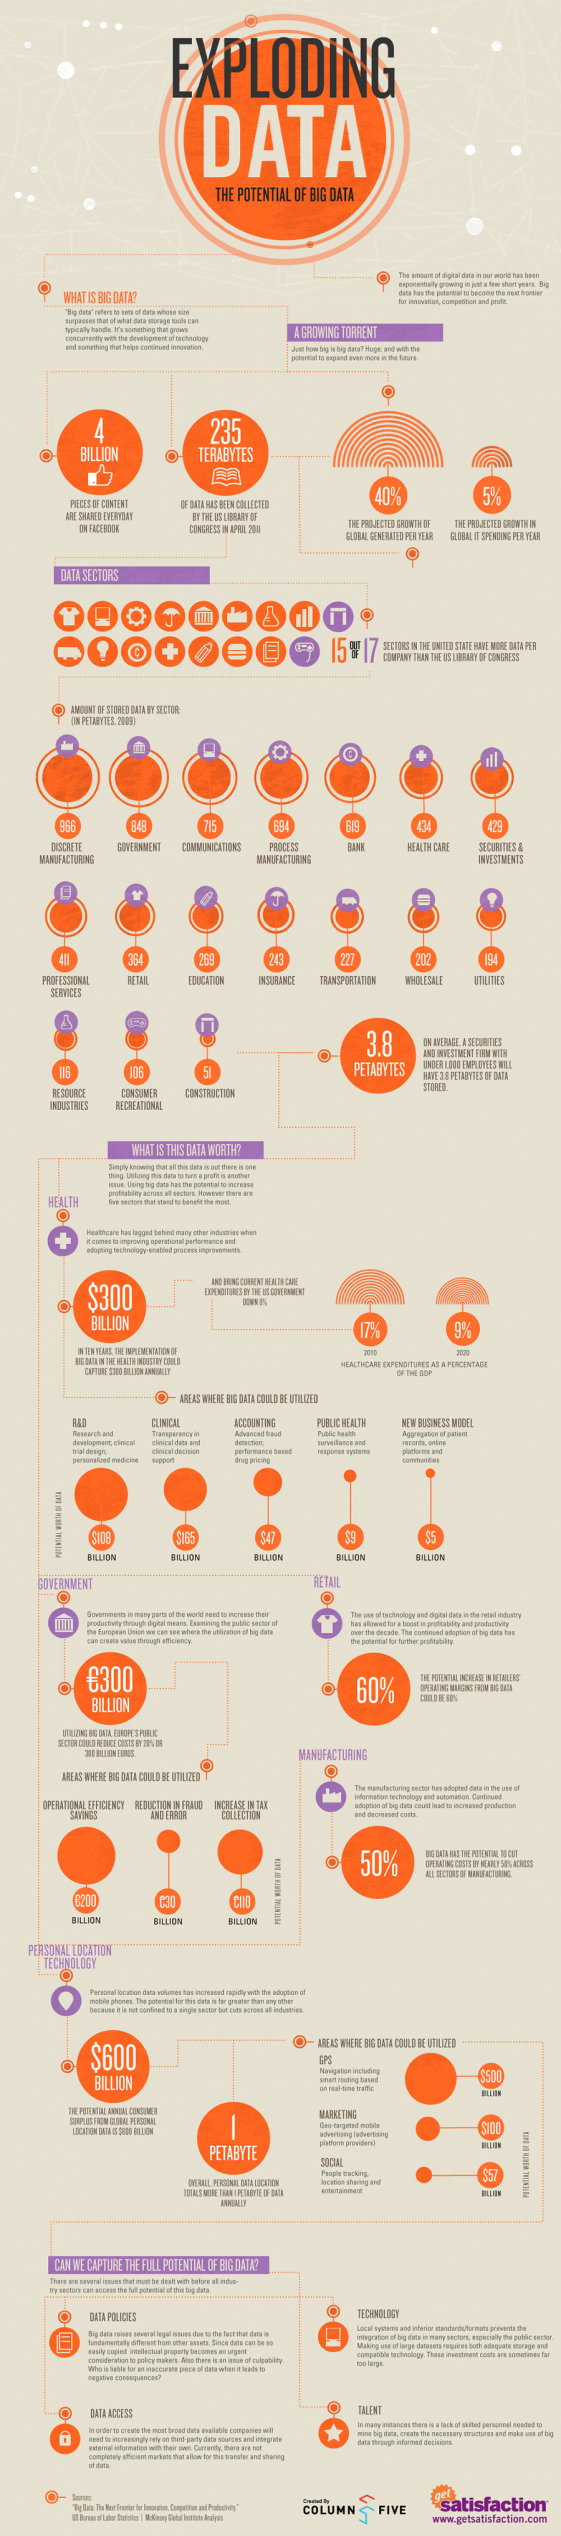 Big Data Infographic from Get Satisfaction